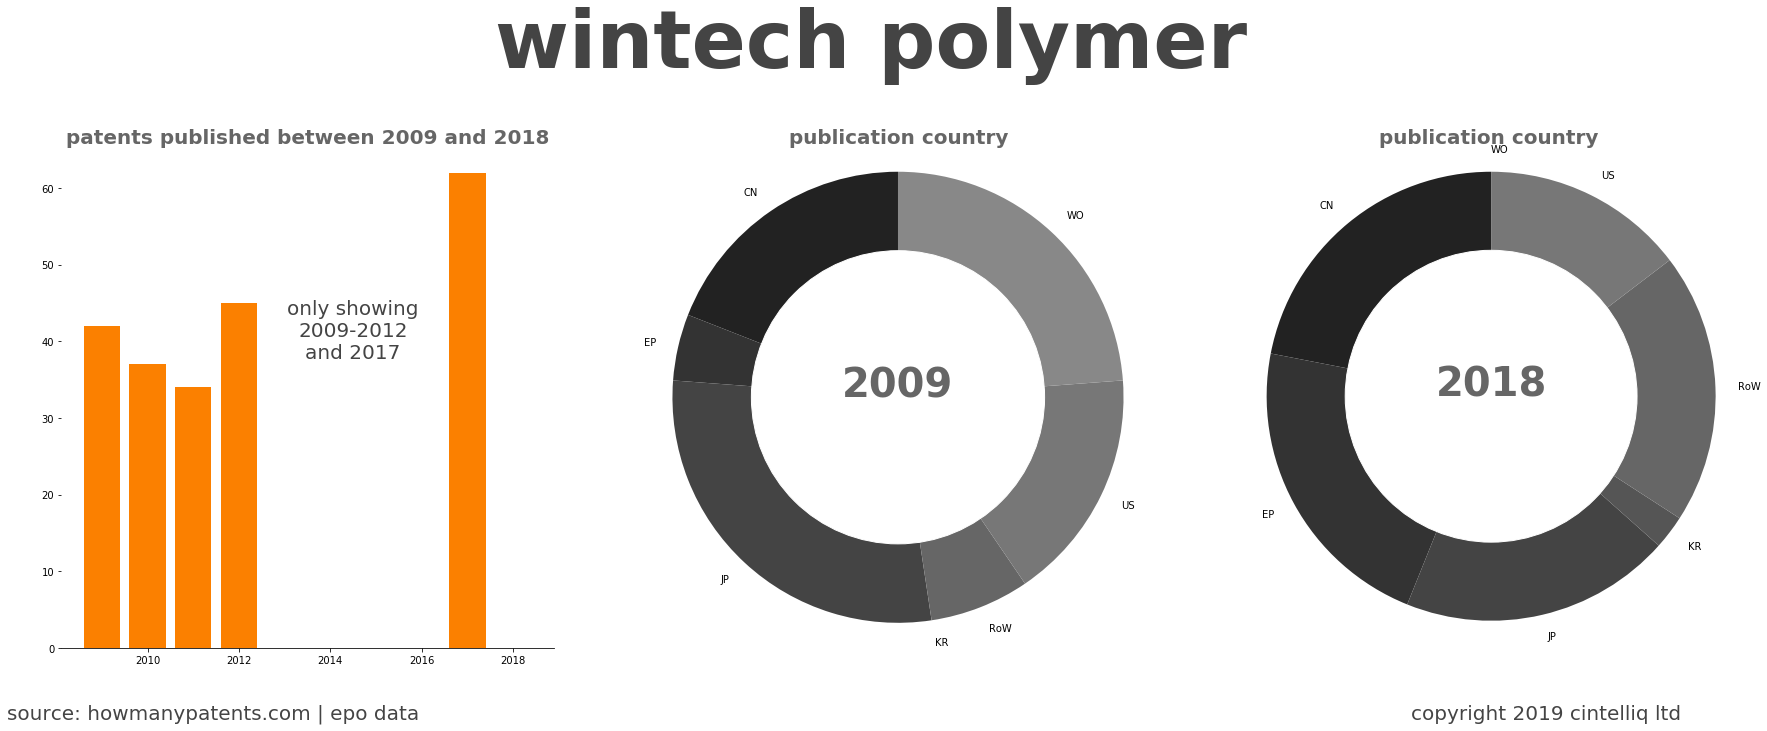 summary of patents for Wintech Polymer